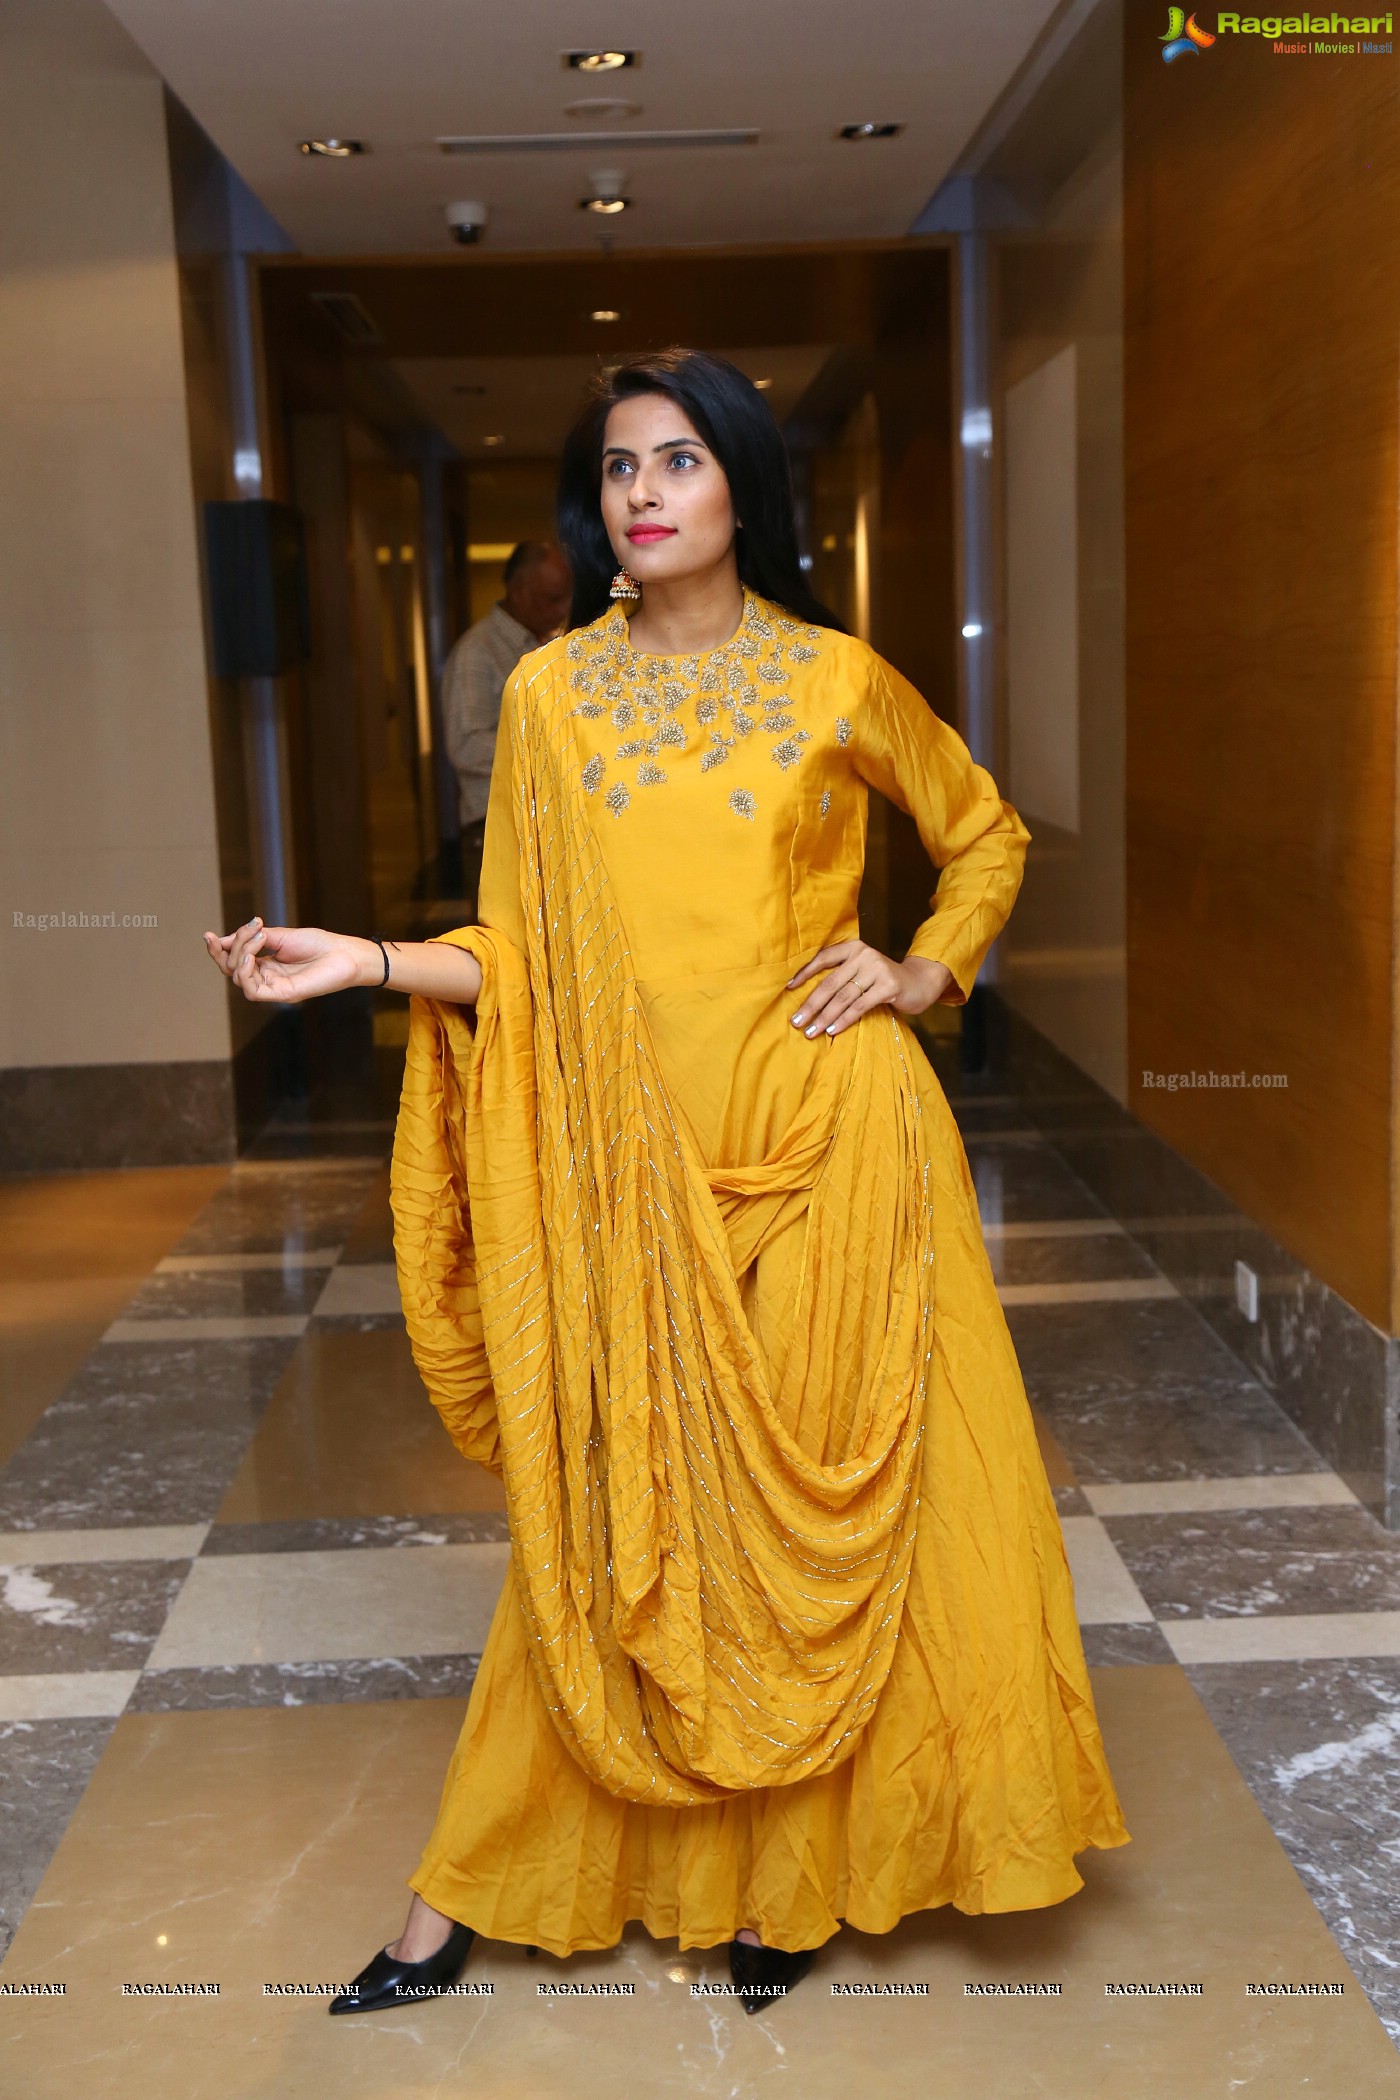 Krupa at Sutraa Designer Fashion Exhibition 2018 (Posters)